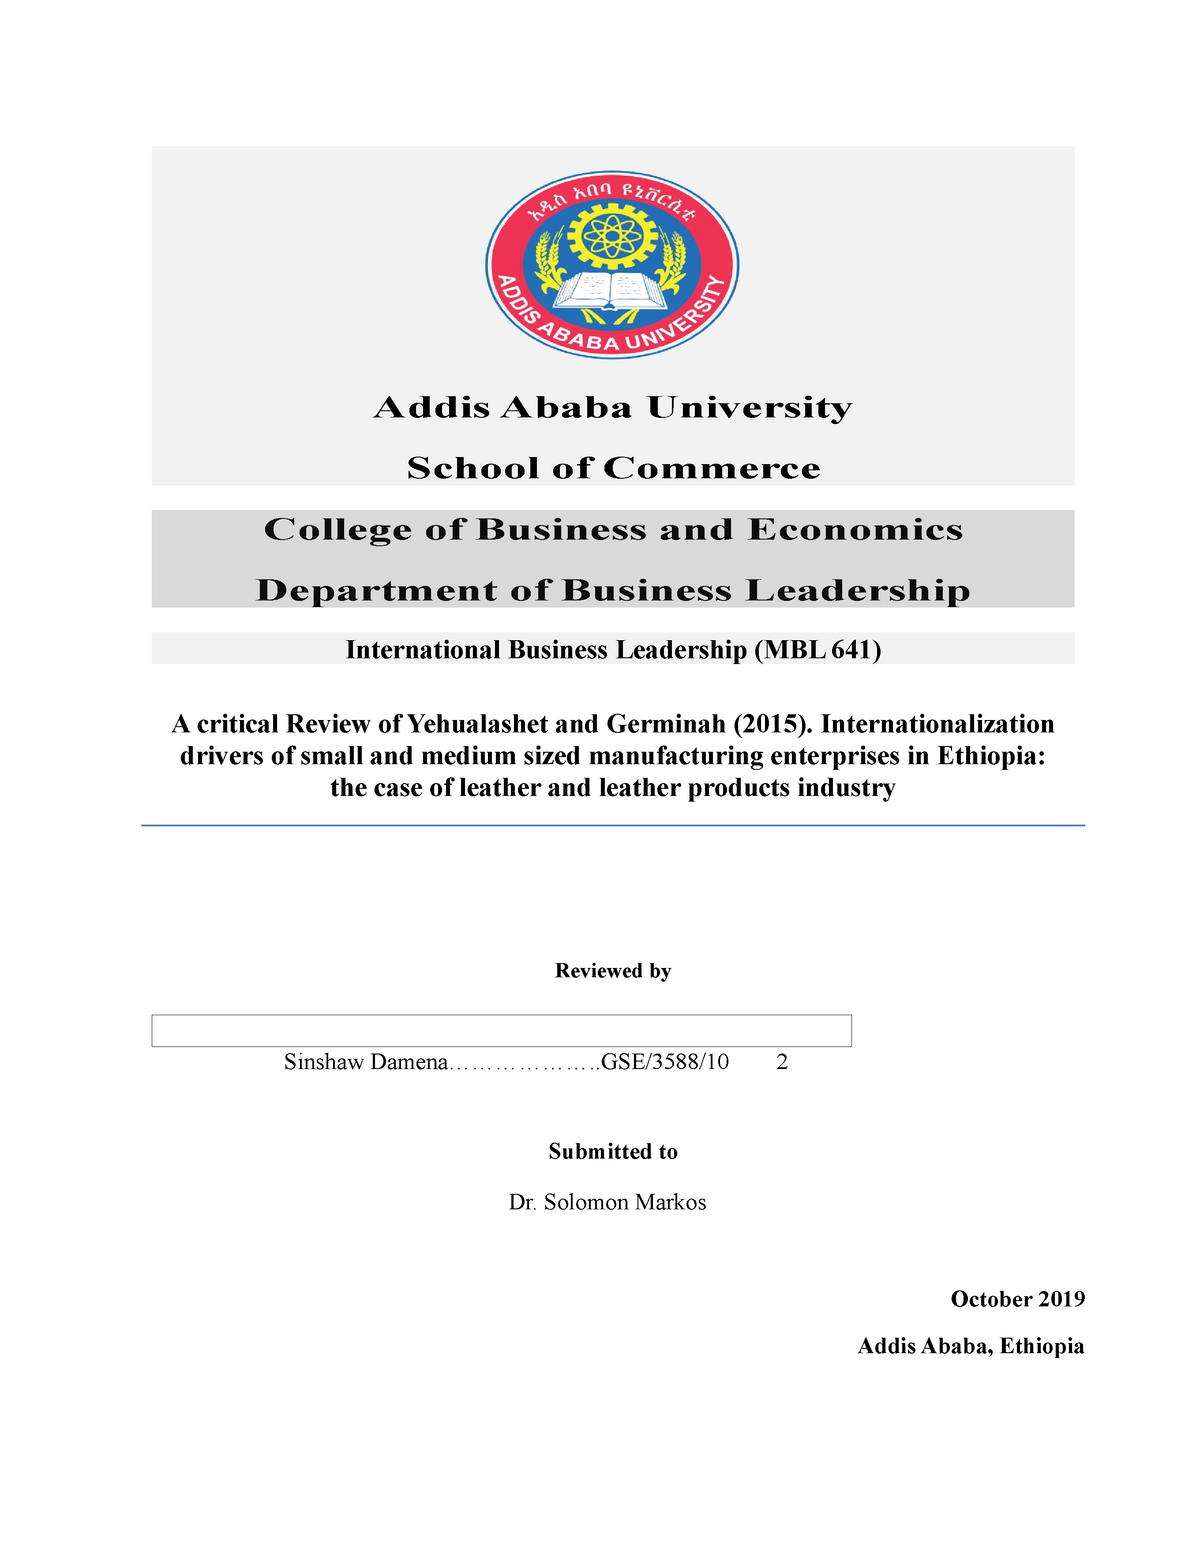 research paper on management in ethiopia pdf